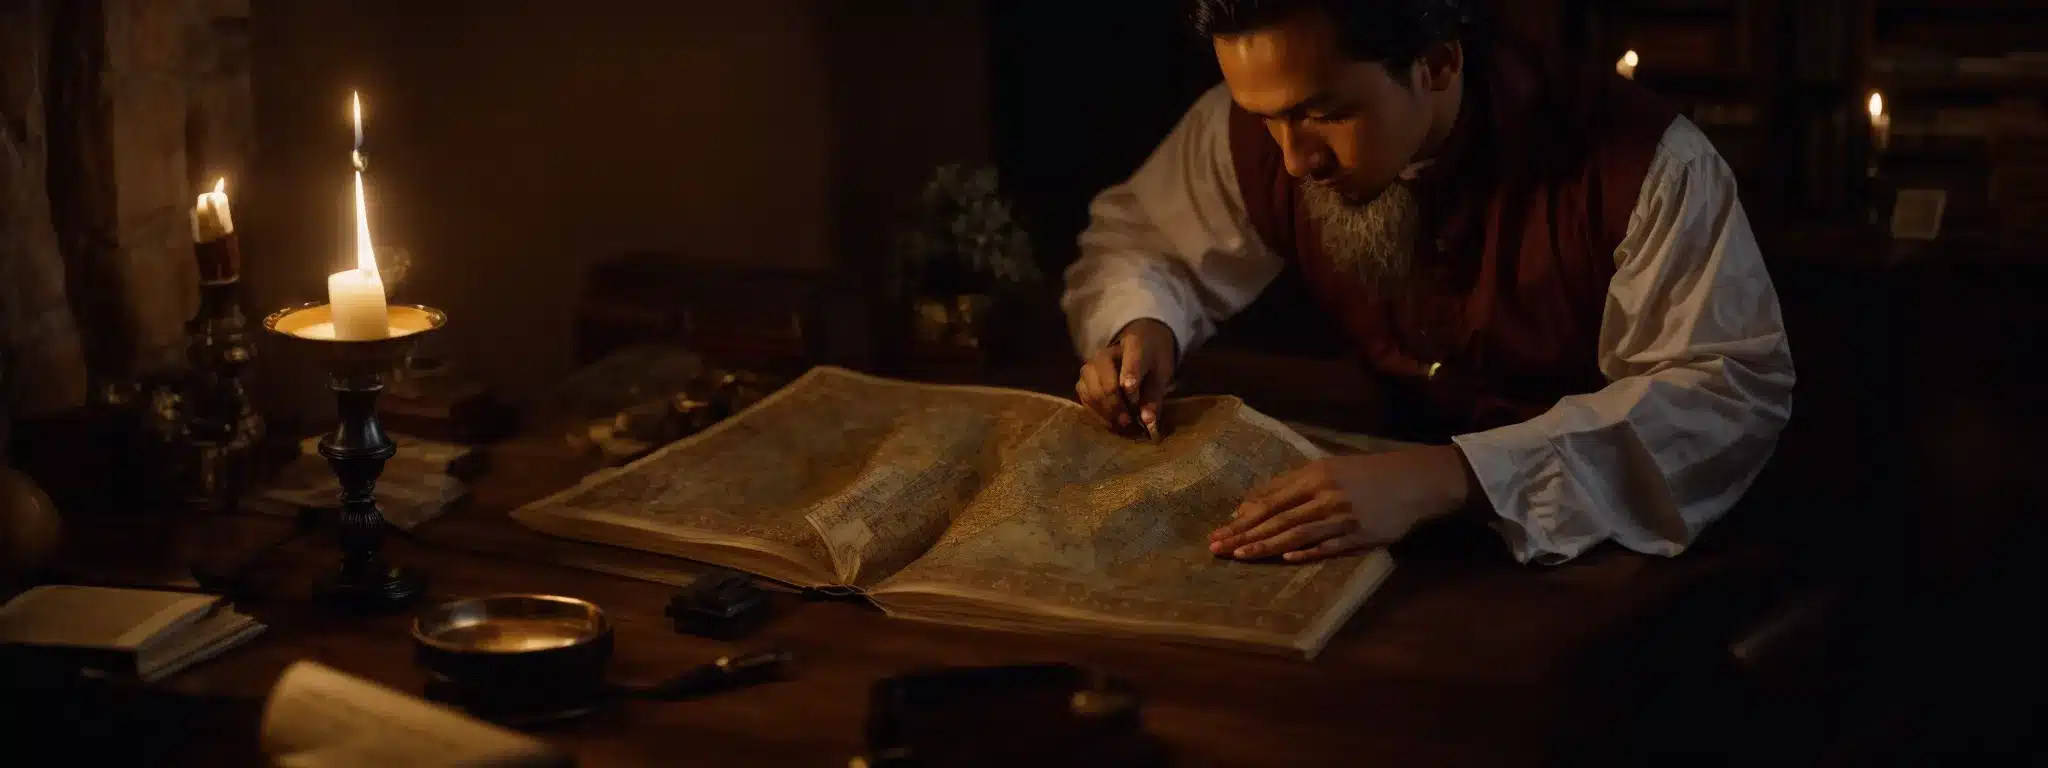 A Scholar Pouring Over Ancient Maps And Tomes In A Candlelit Study, Drawing Circles Around Specific Areas And Making Strategic Notes.